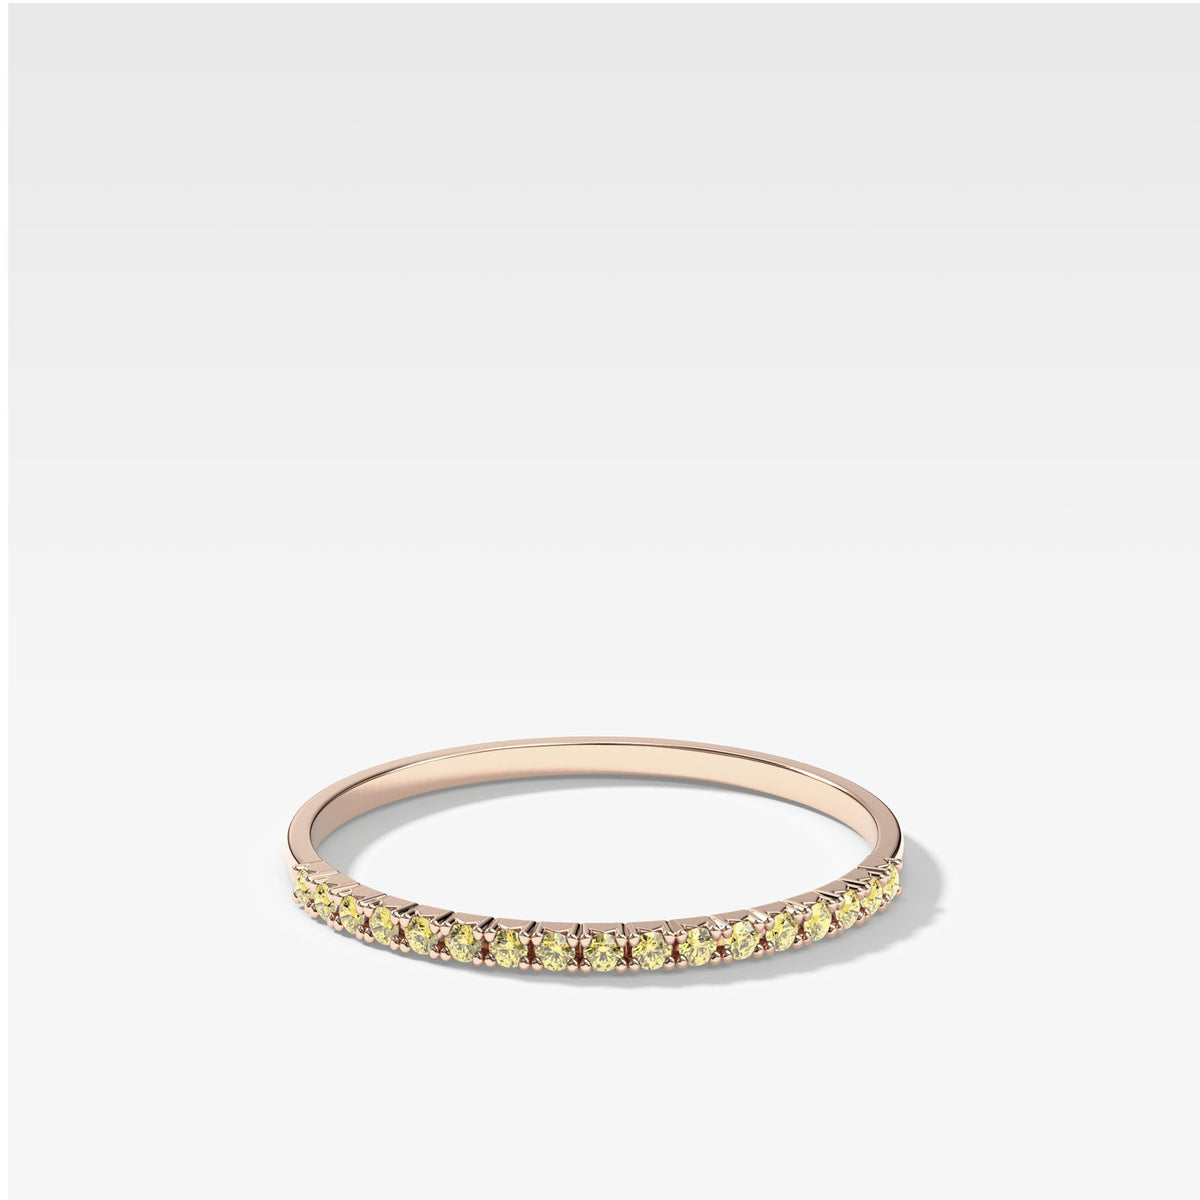 Petite French Pavé Stacker with Yellow Diamonds by Good Stone in Rose Gold